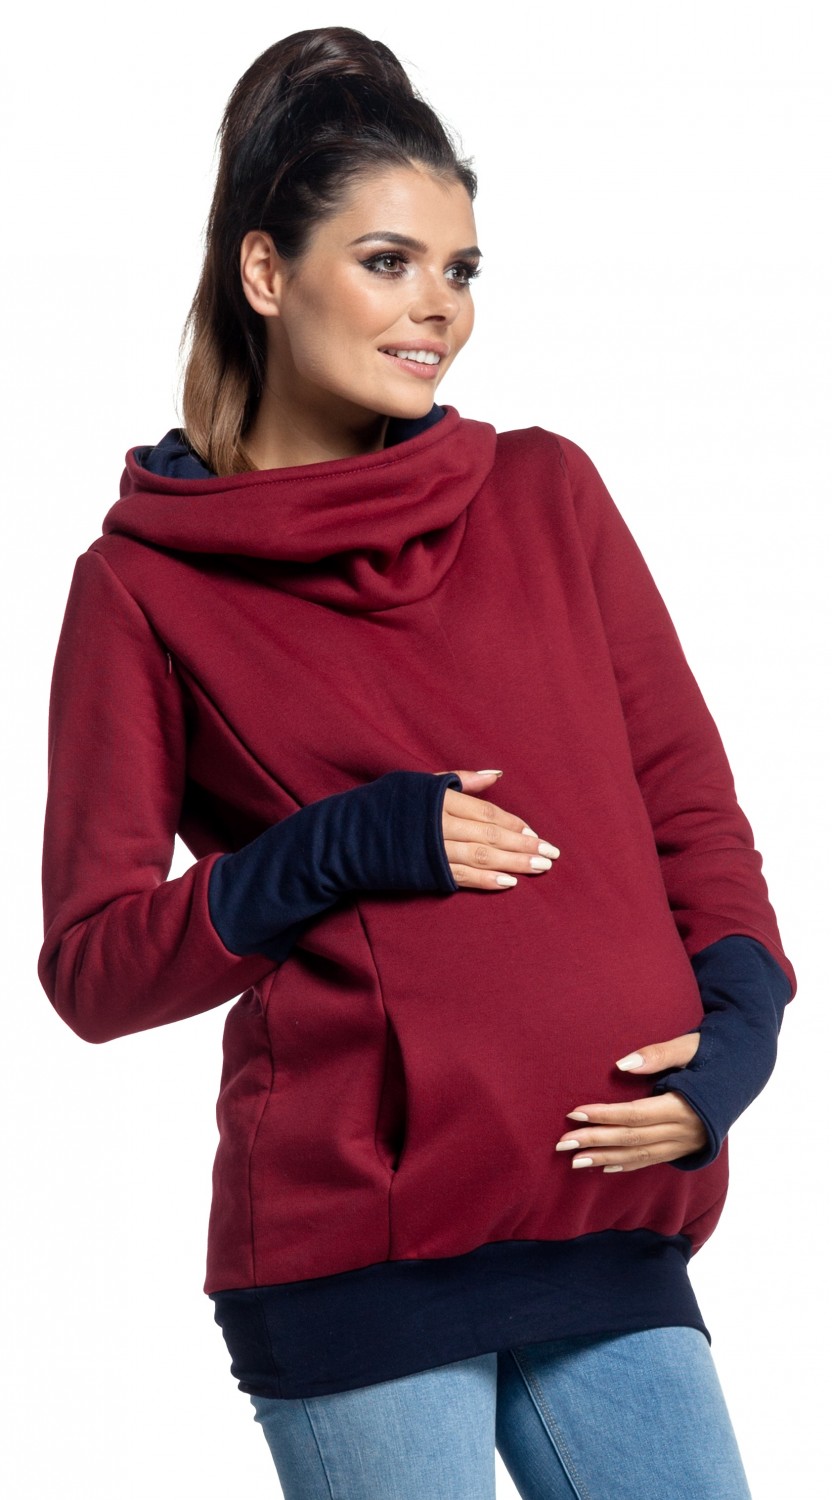 490p Women's Maternity Nursing Knitted Sweater Long Sleeves Happy Mama 